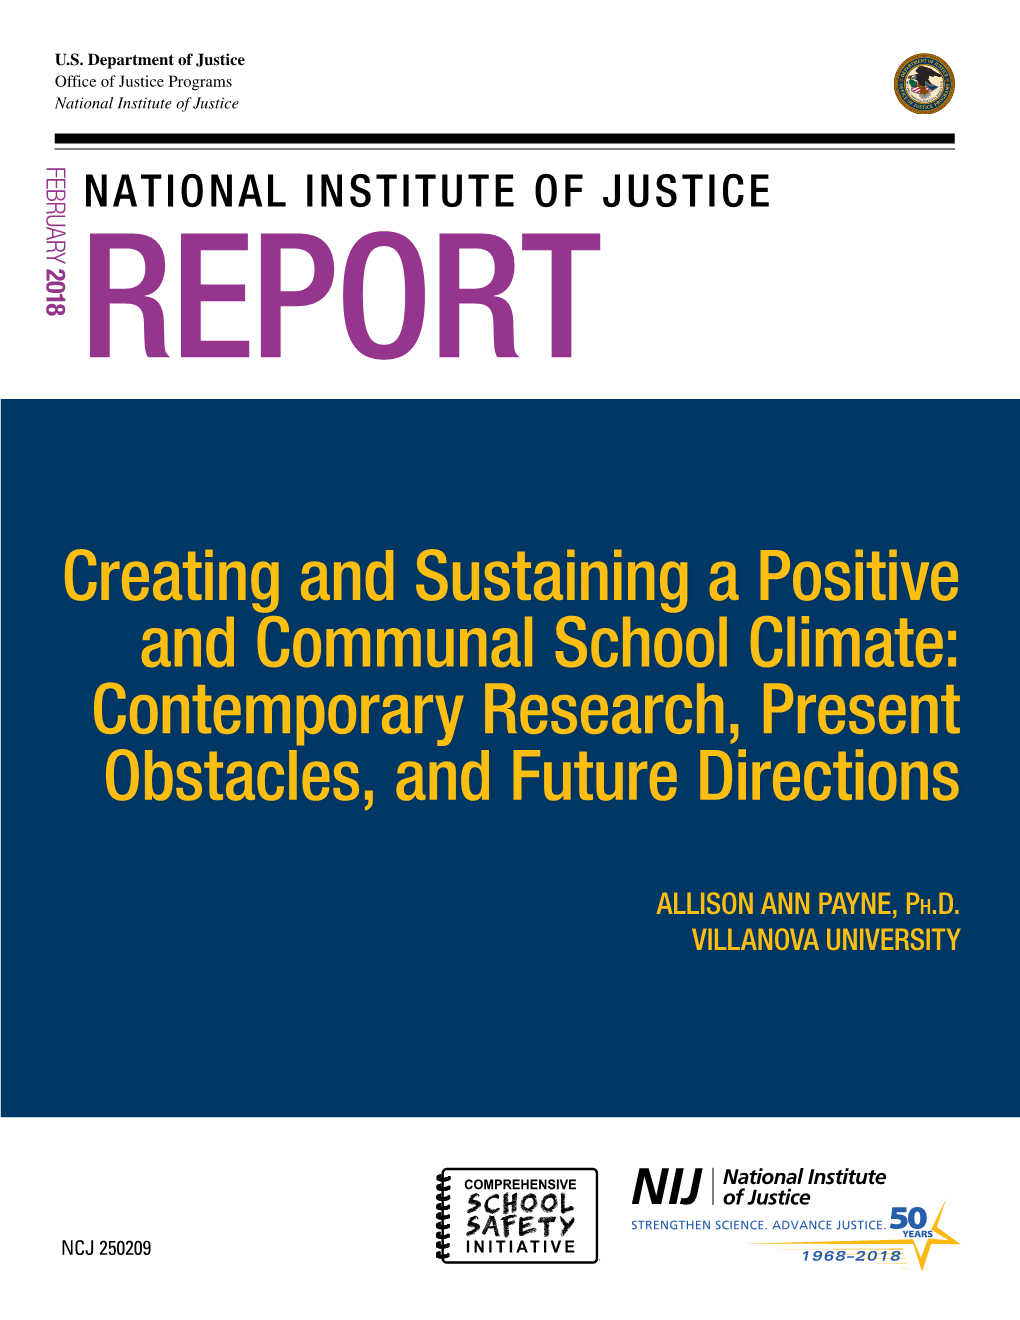 Creating and Sustaining a Positive and Communal School Climate: Contemporary Research, Present Obstacles, and Future Directions